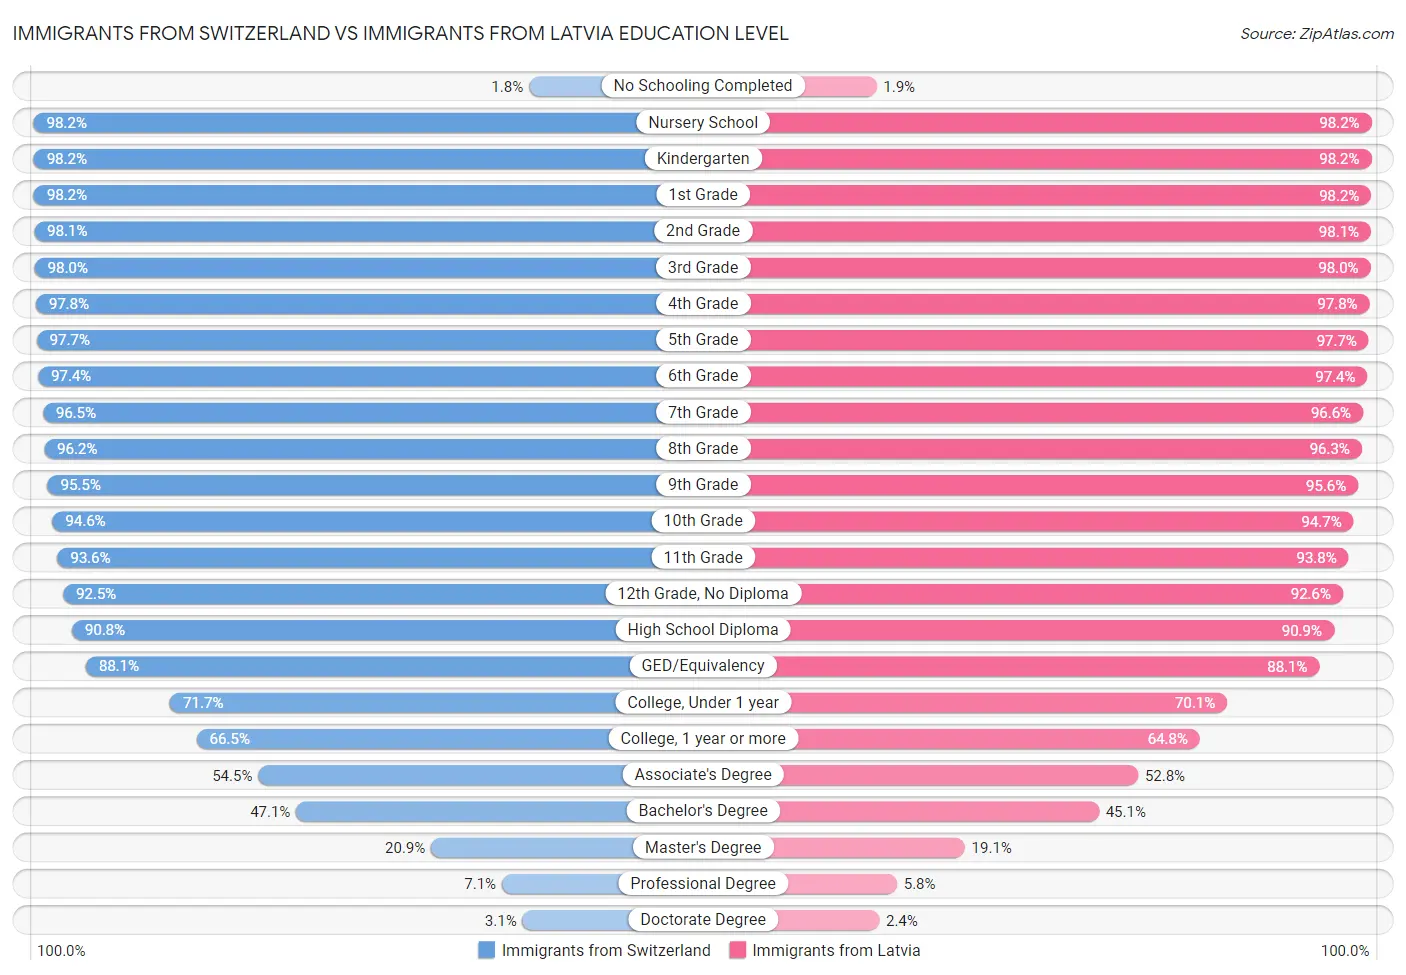 Immigrants from Switzerland vs Immigrants from Latvia Education Level